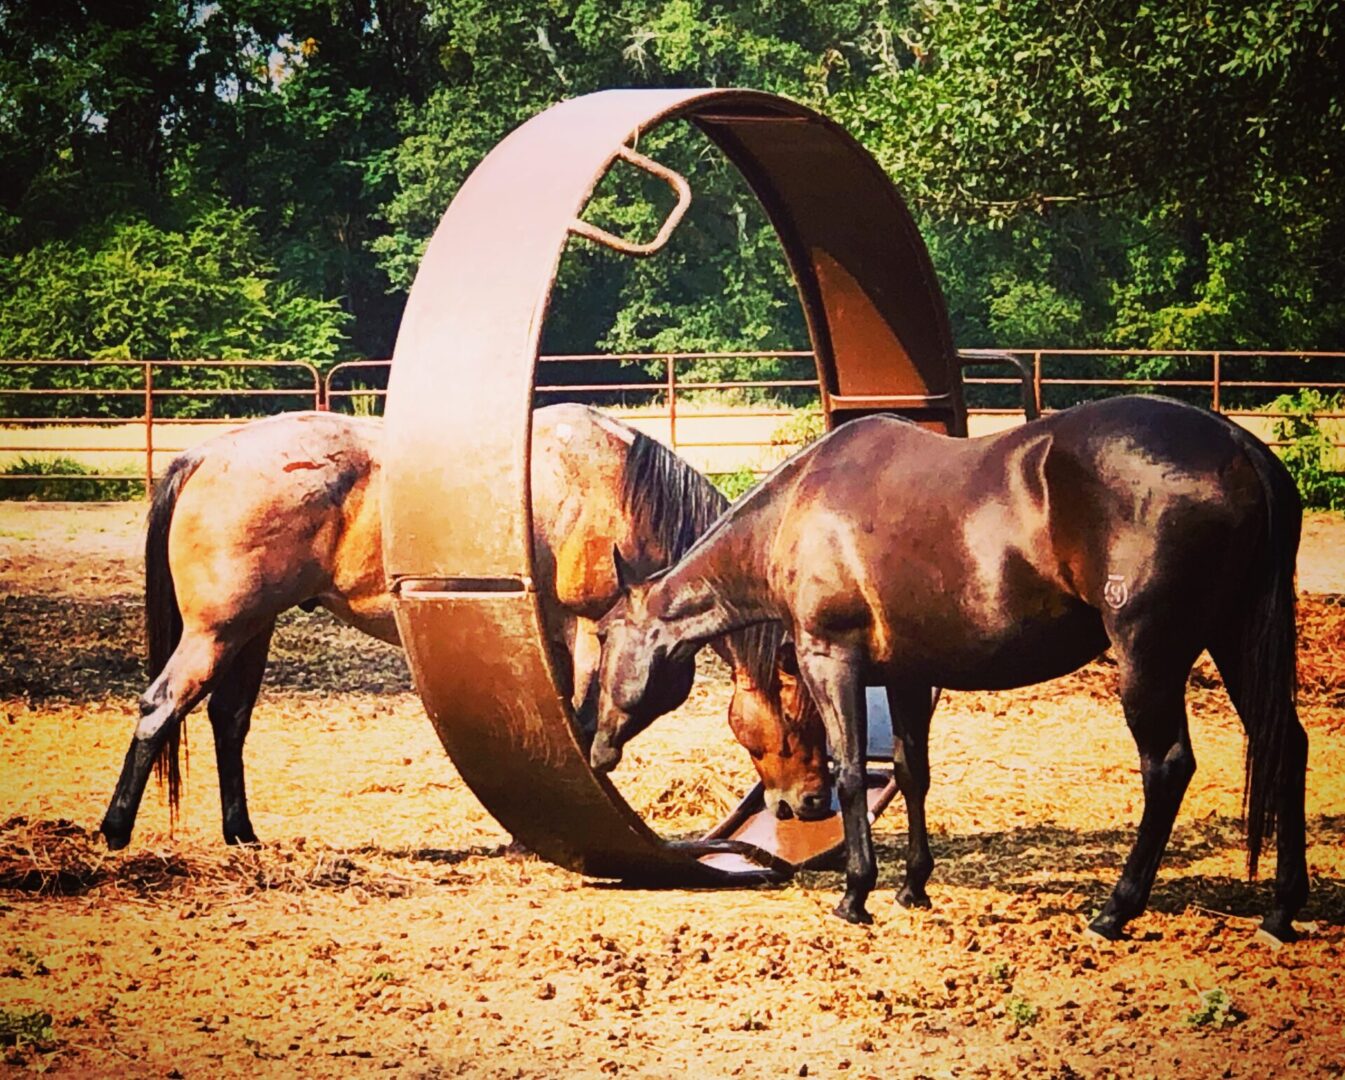 Three horses are standing in a field with a large metal object.